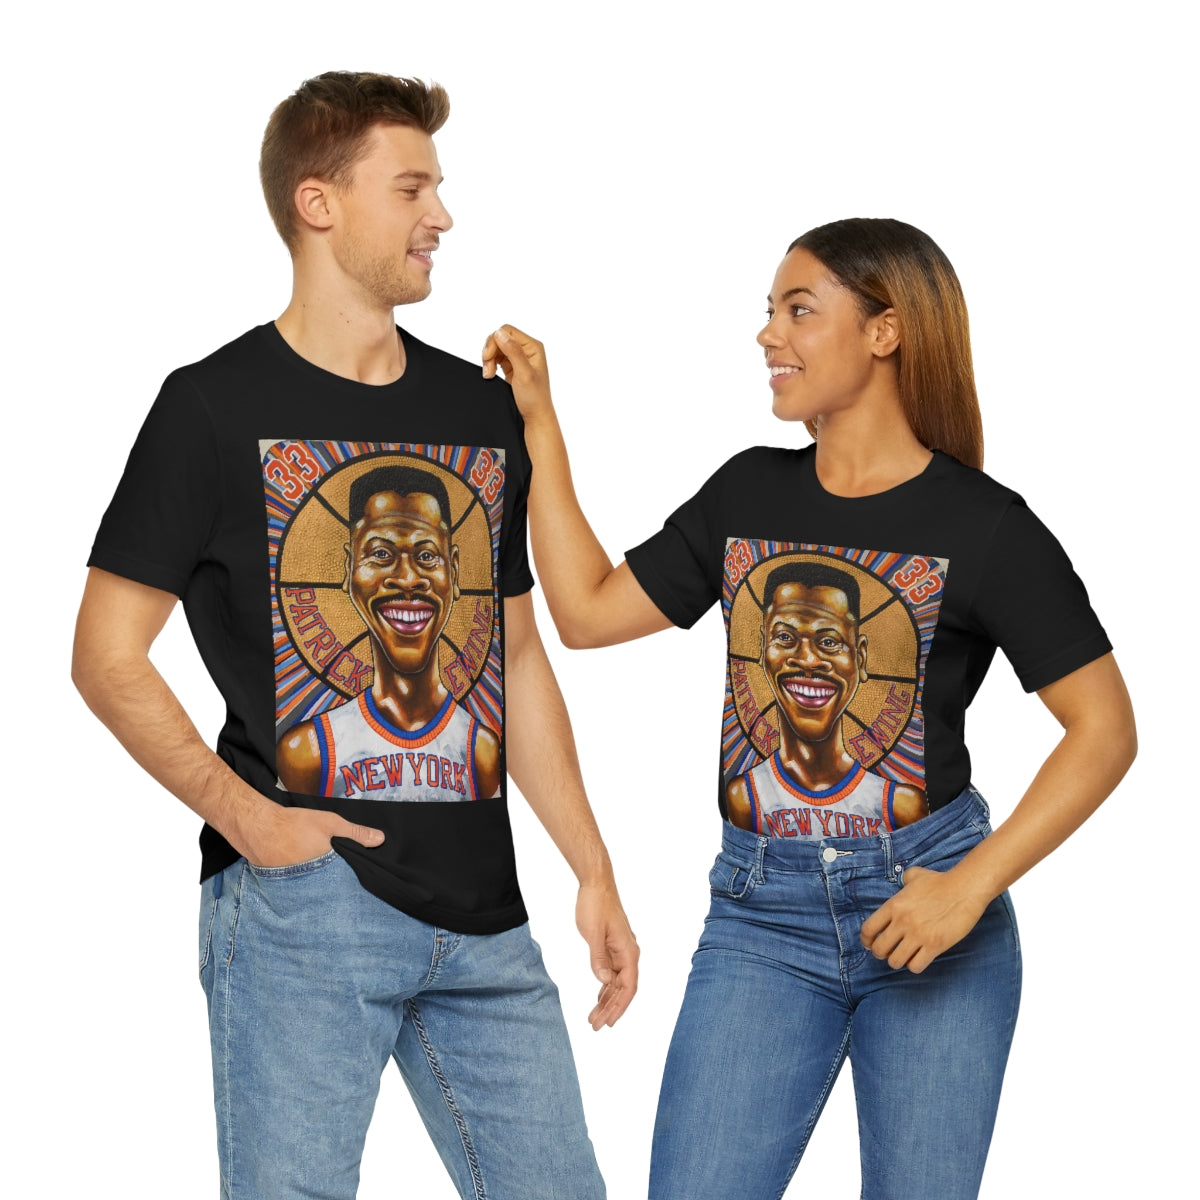 Ewing x Tom Sanford Patrick Ewing Stained Glass Tee